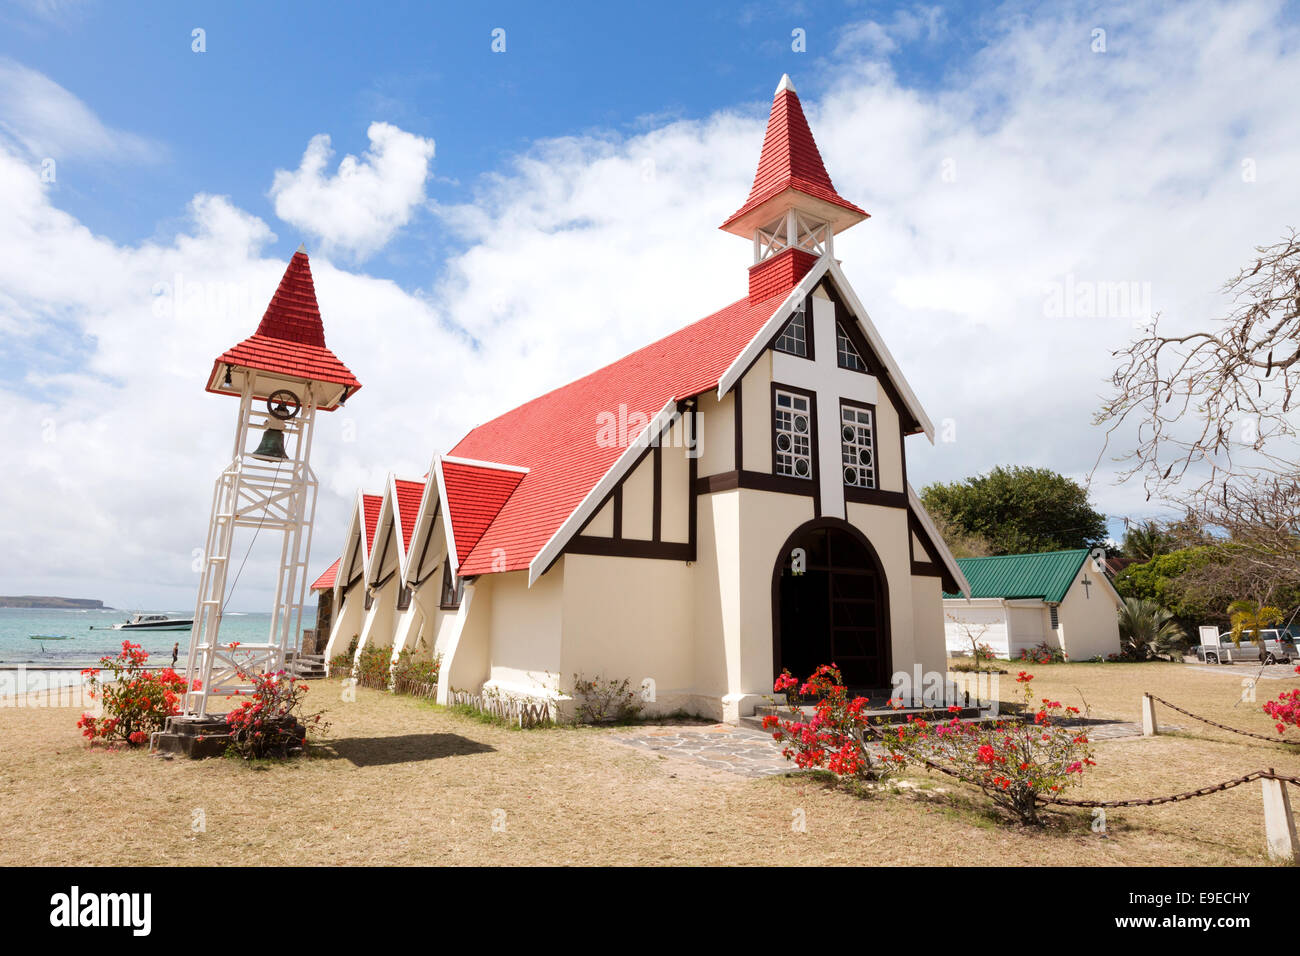 The red roofed church at Cap Malheureux, north coast, Mauritius Stock Photo